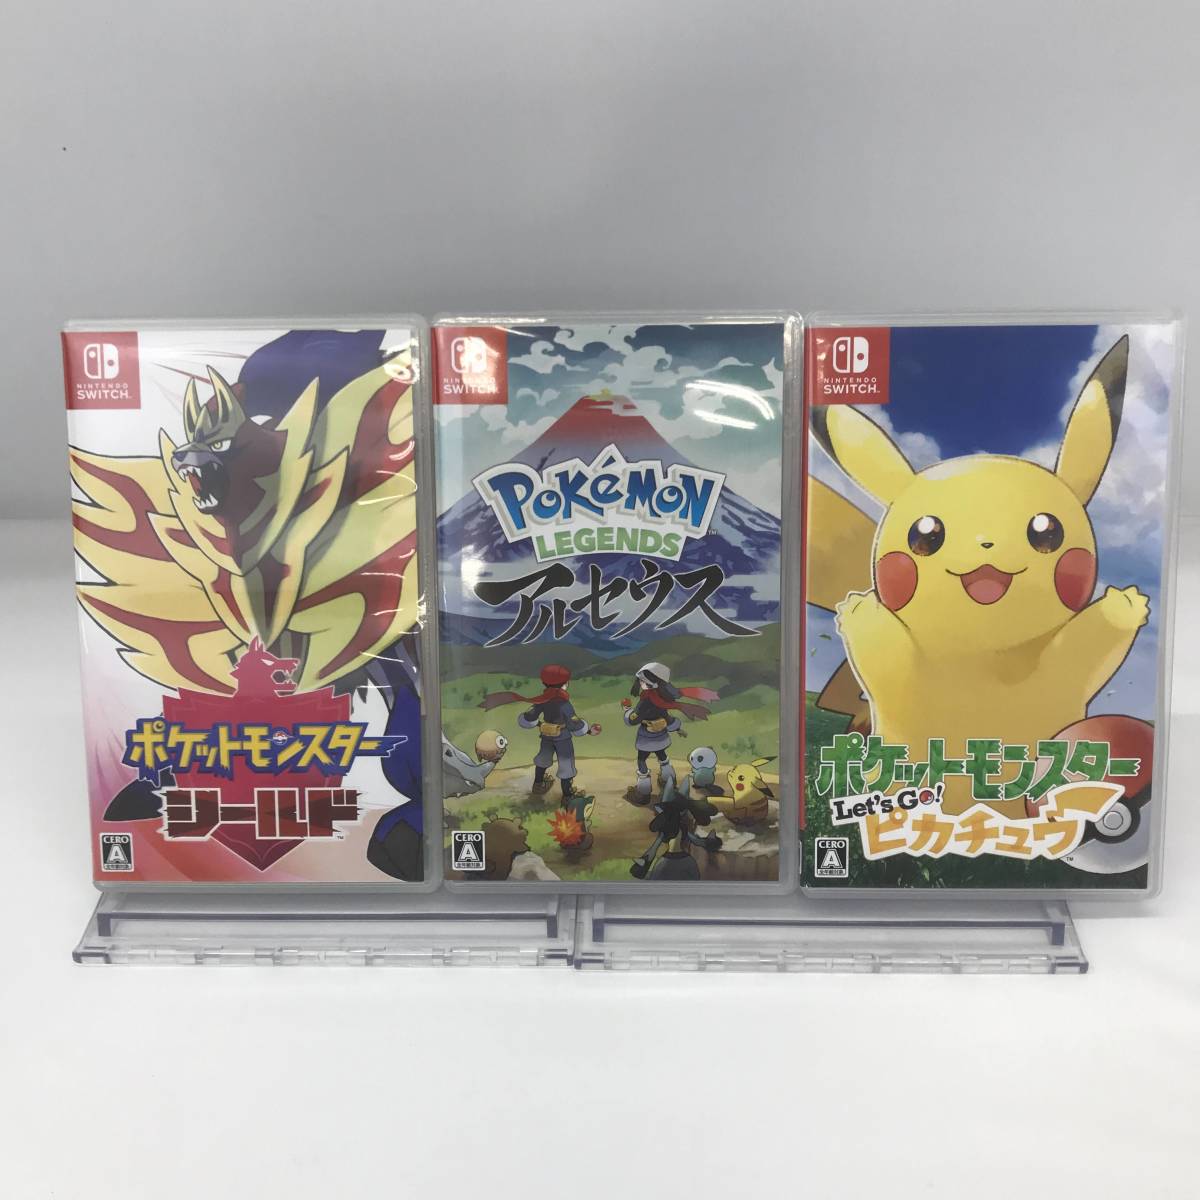 T8444 ☆1円～【SW】Nintendo Switch ソフト3本セット「ポケモン シールド/アルセウス/ピカチュウ」 中古品 ◎レターパック発送可◎  product details | Yahoo! Auctions Japan proxy bidding and shopping service  | FROM JAPAN